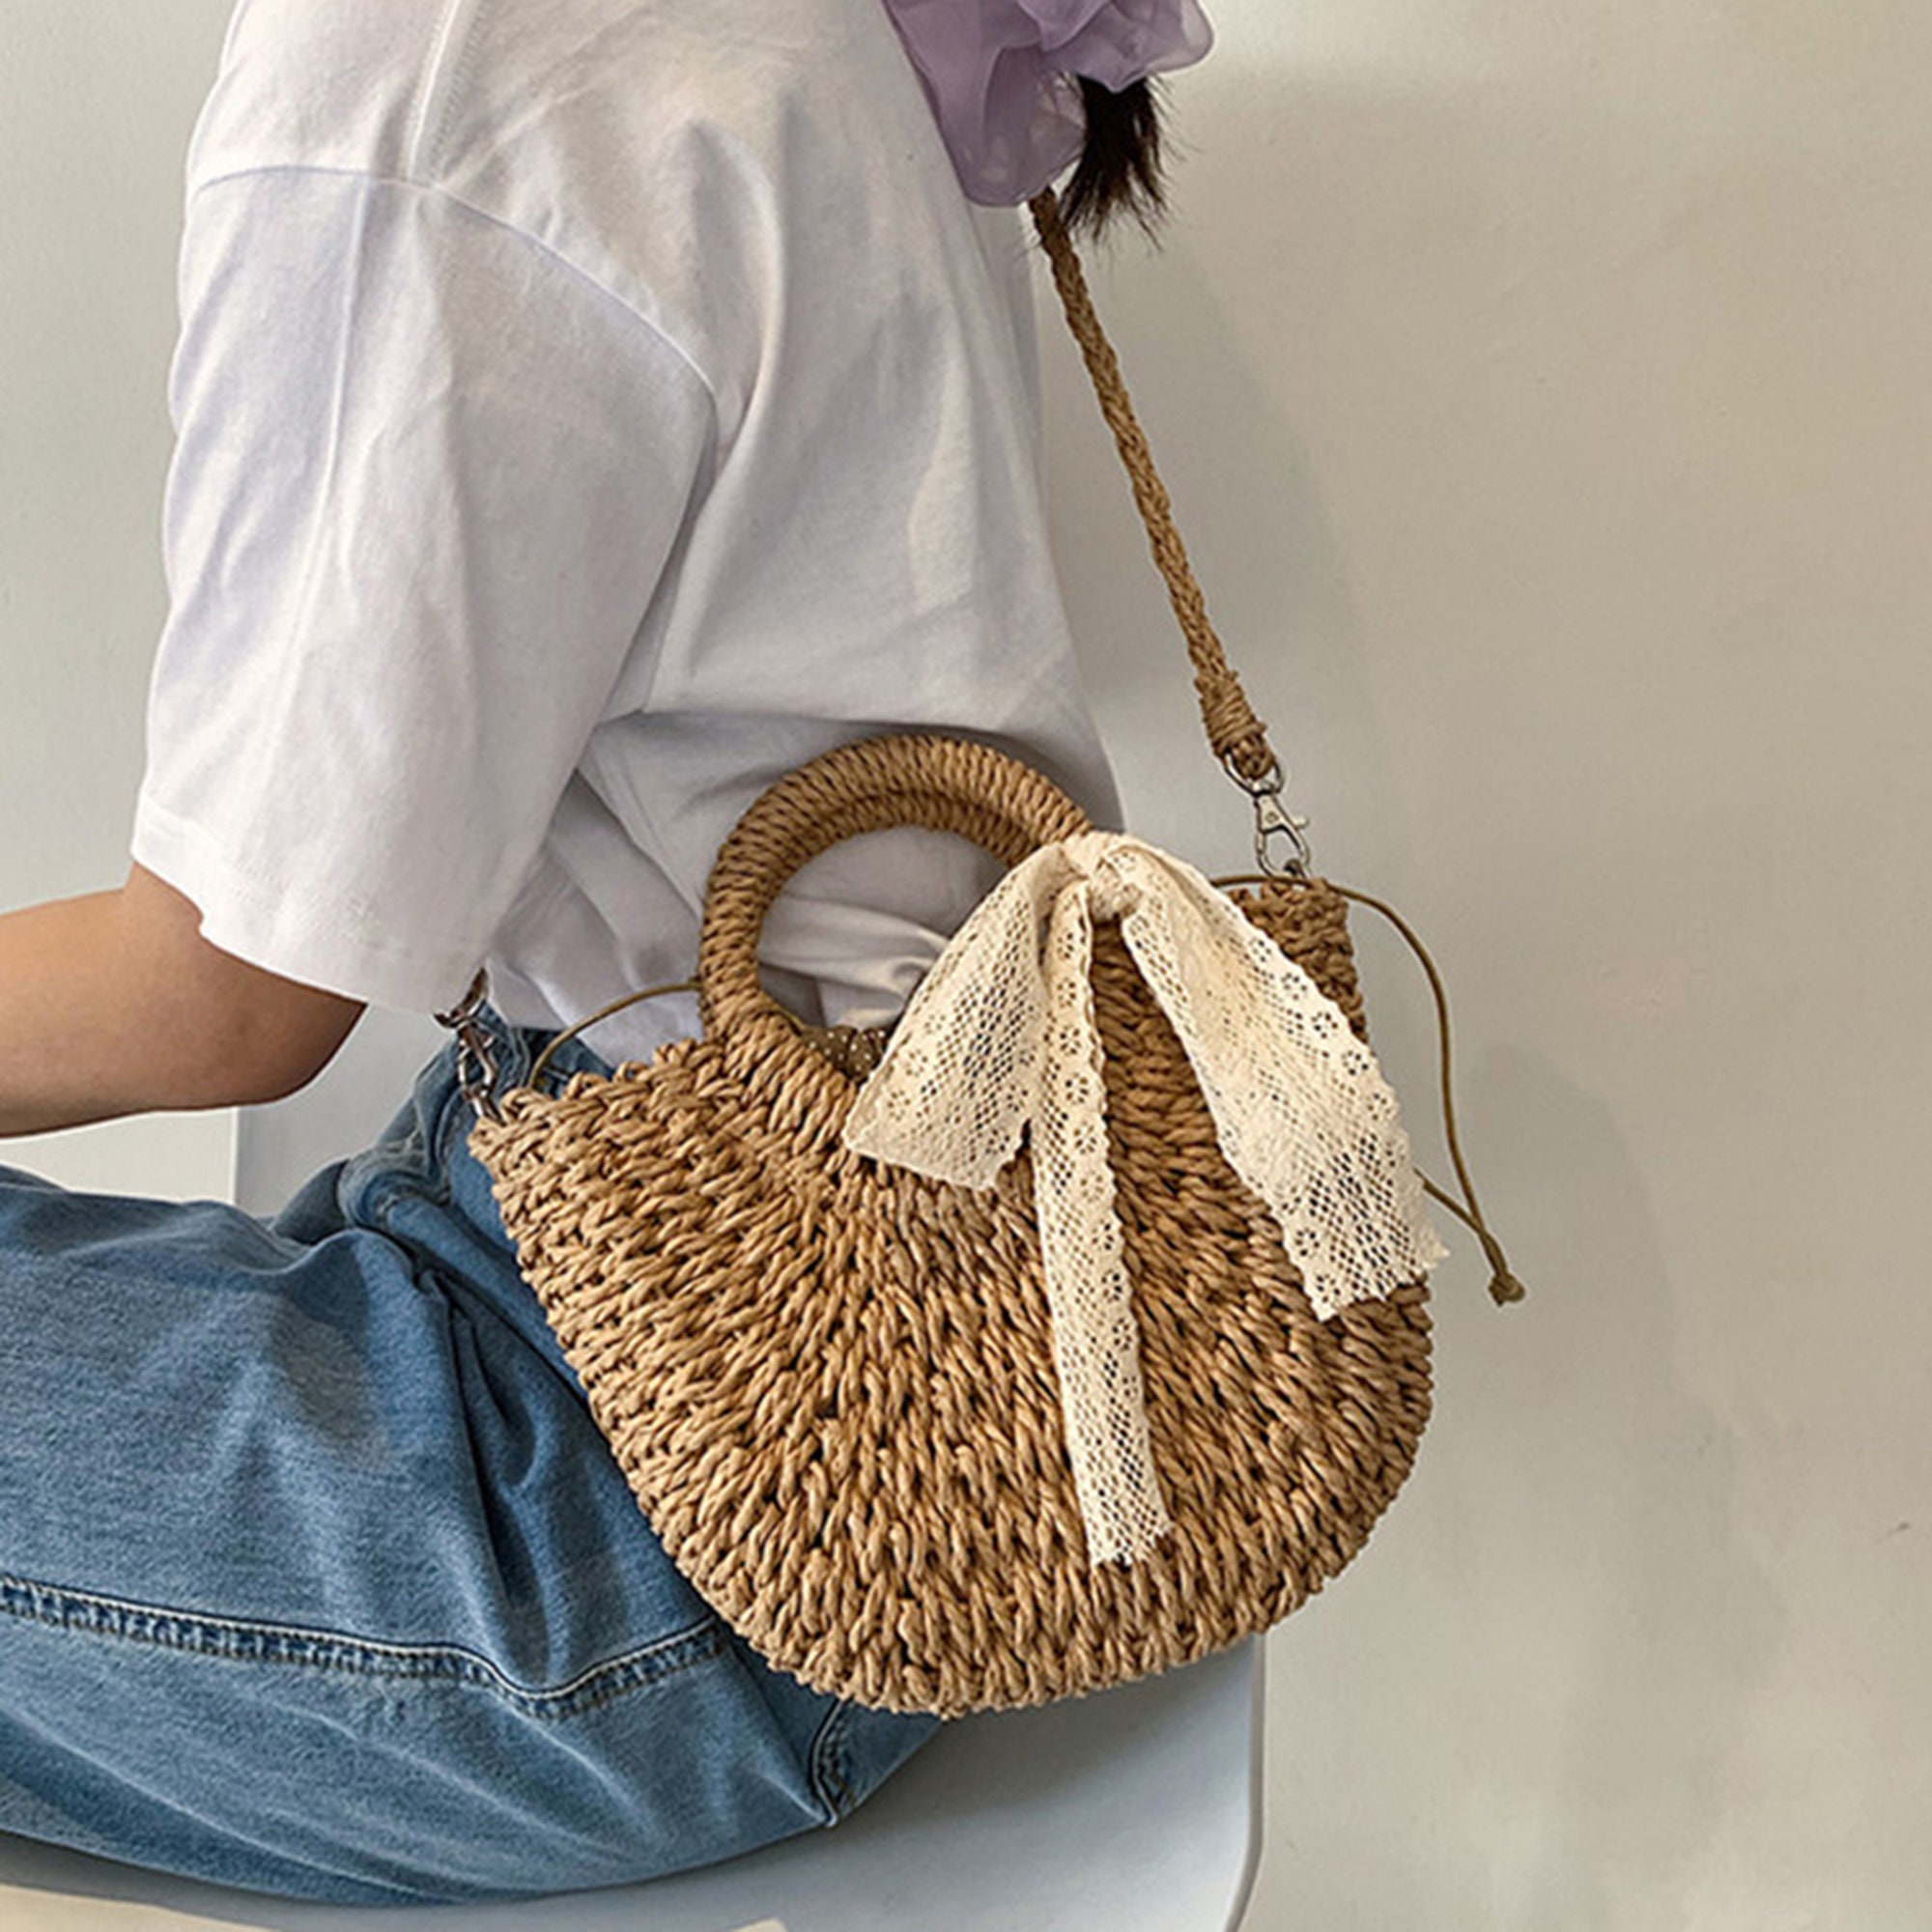 WICKER BAGS FOR SPRING AND SUMMER